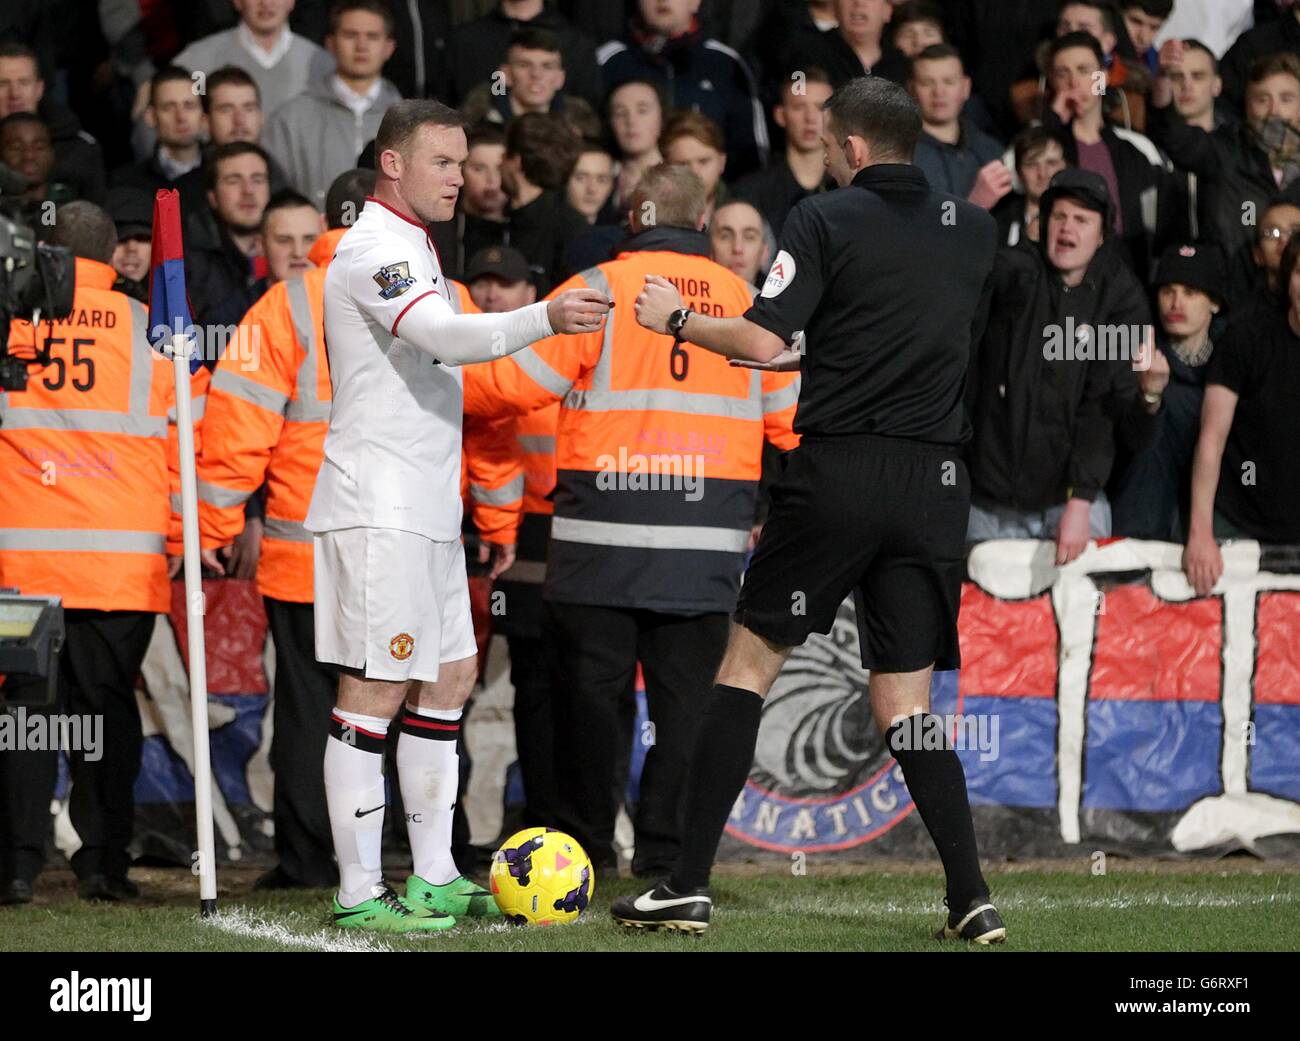 Soccer - Barclays Premier League - Crystal Palace v Manchester United - Selhurst Park. Manchester United's Wayne Rooney (left) hands over an object thrown from the crowd to referee Michael Oliver Stock Photo